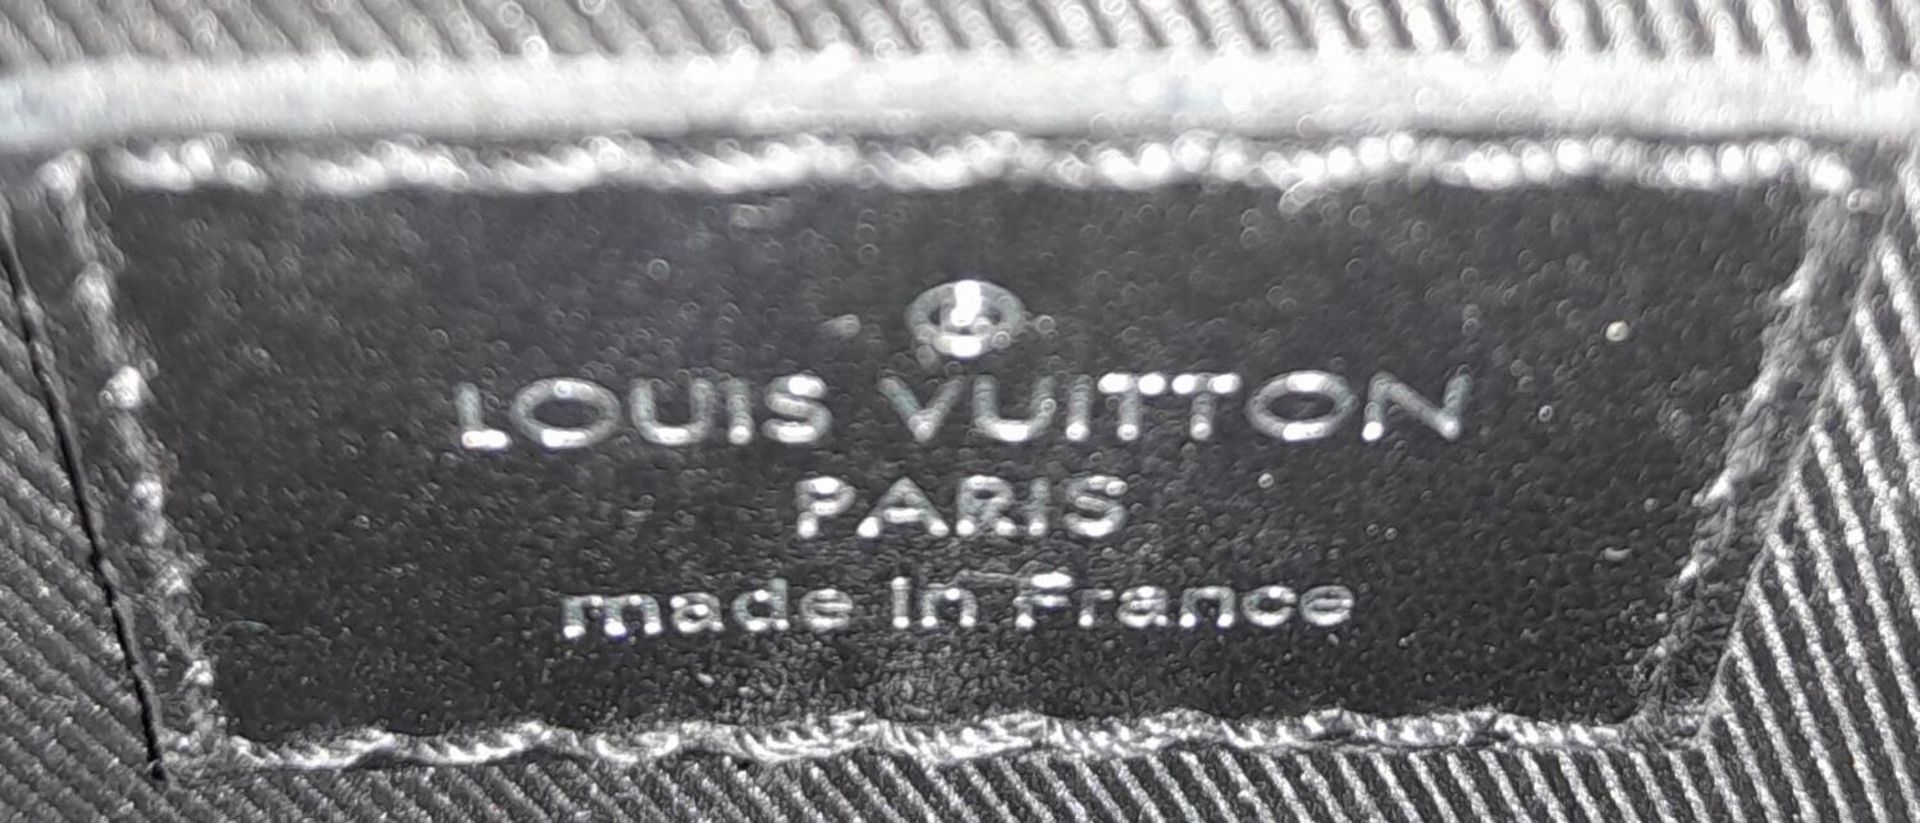 A Louis Vuitton Black Eclipse Trunk Messenger Bag. Monogramed canvas exterior with black-toned - Image 8 of 10